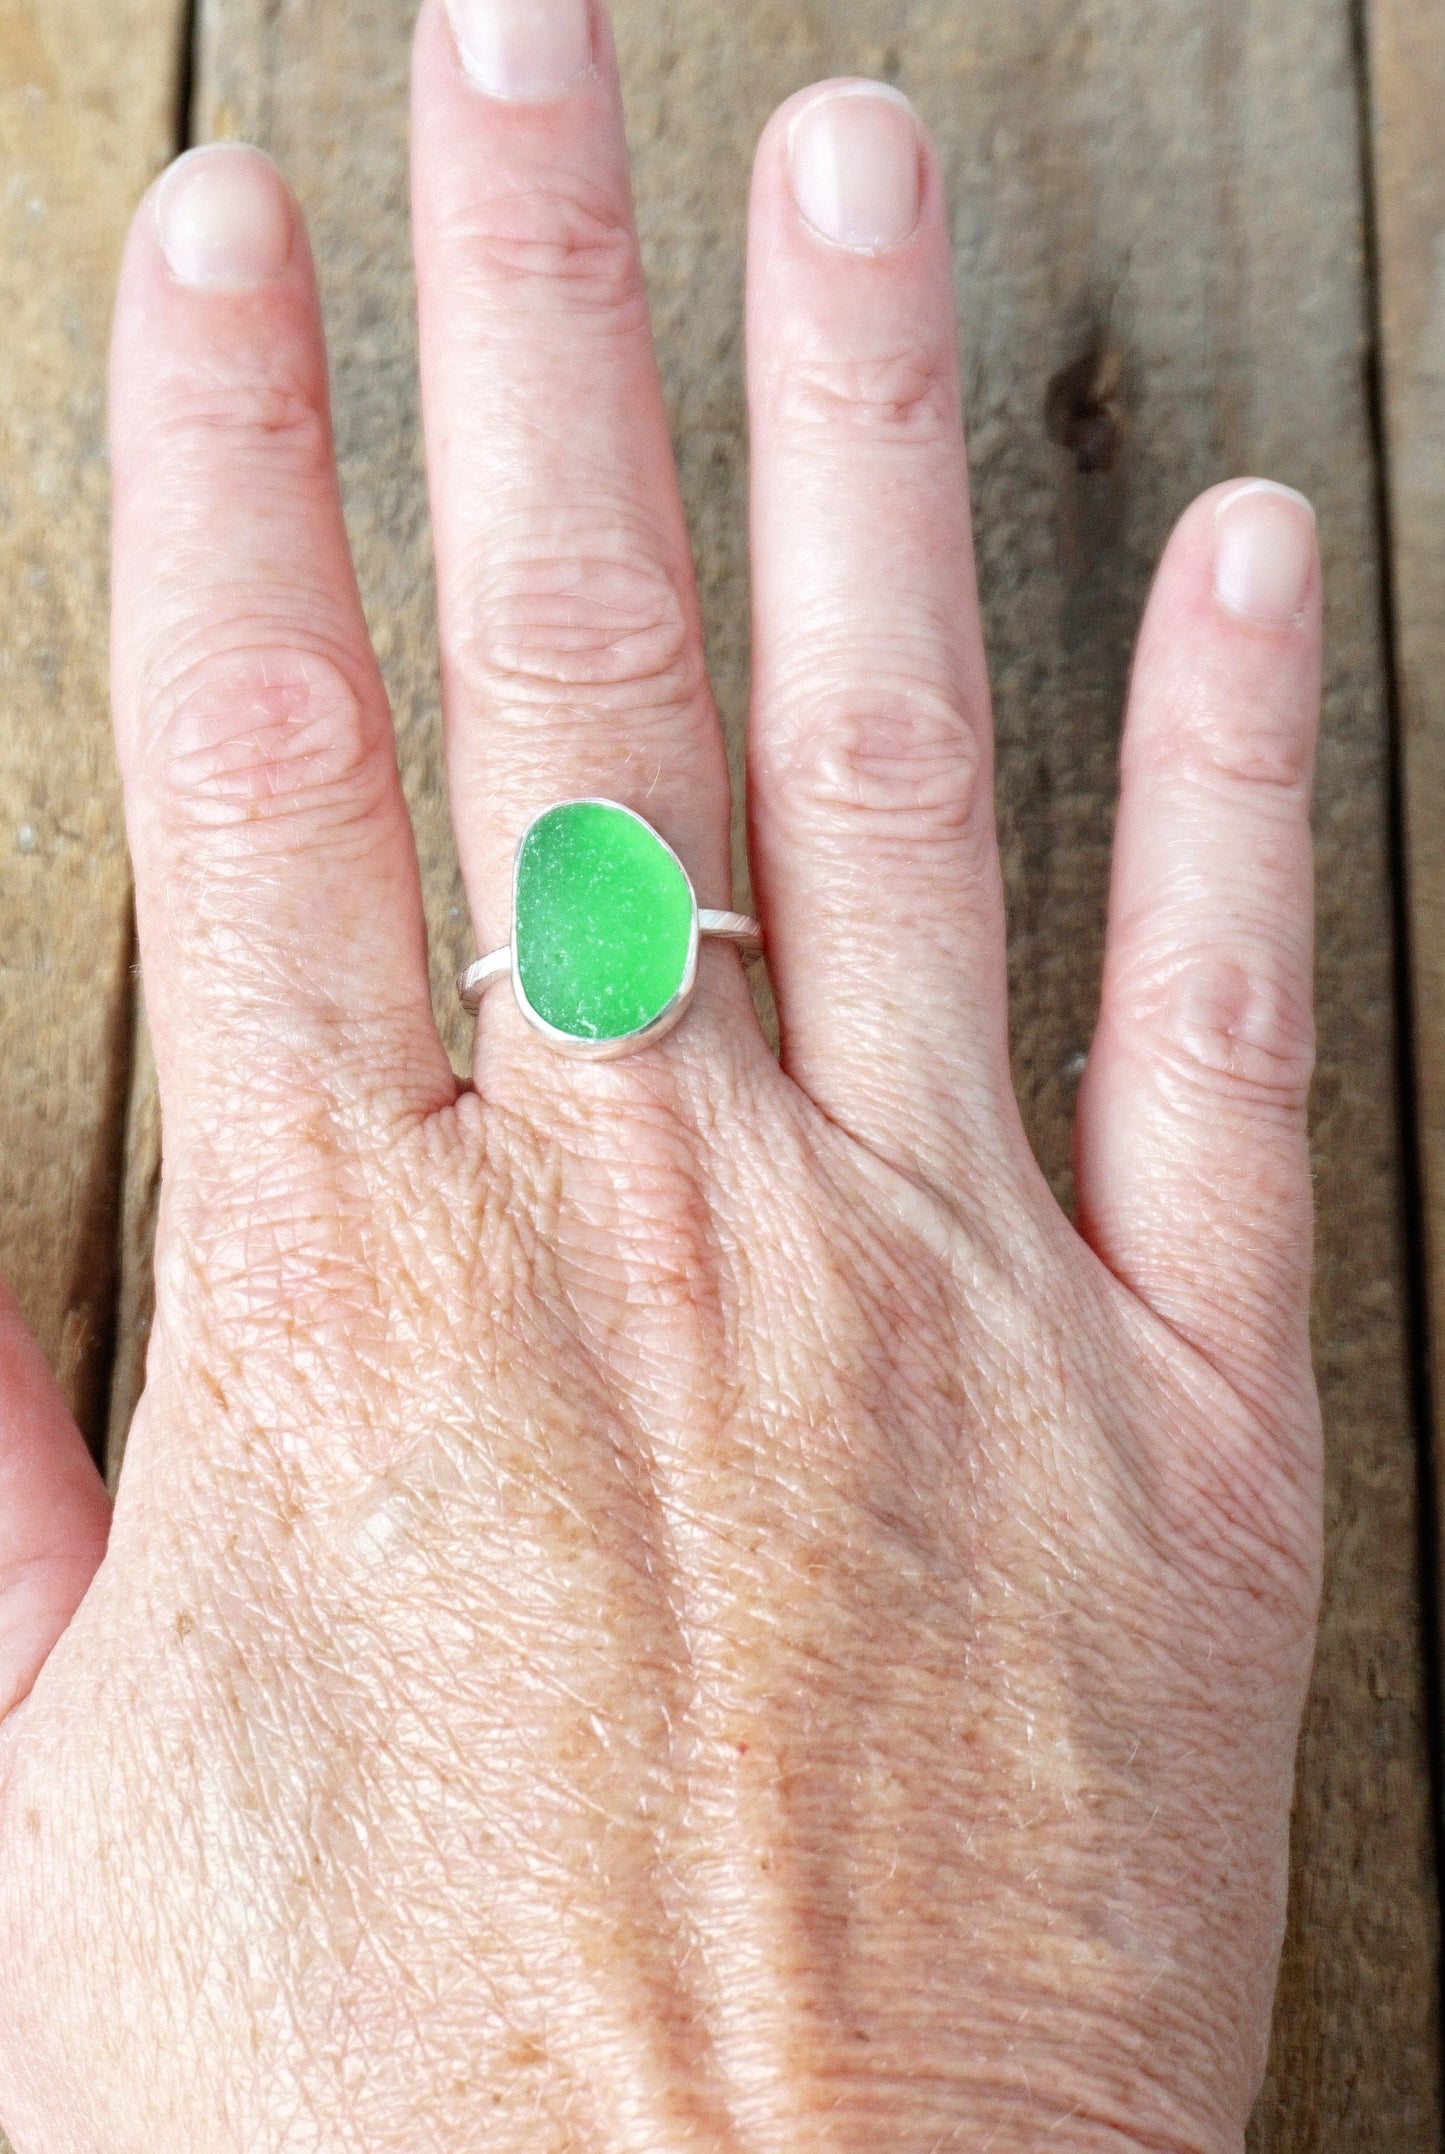 Size 8 3/4 Kelly Green Sea Glass Stacking Ring - Genuine Sea Glass, Natural Sea Glass, Beach Glass Jewelry, Stacking Jewelry Ring, Stacker